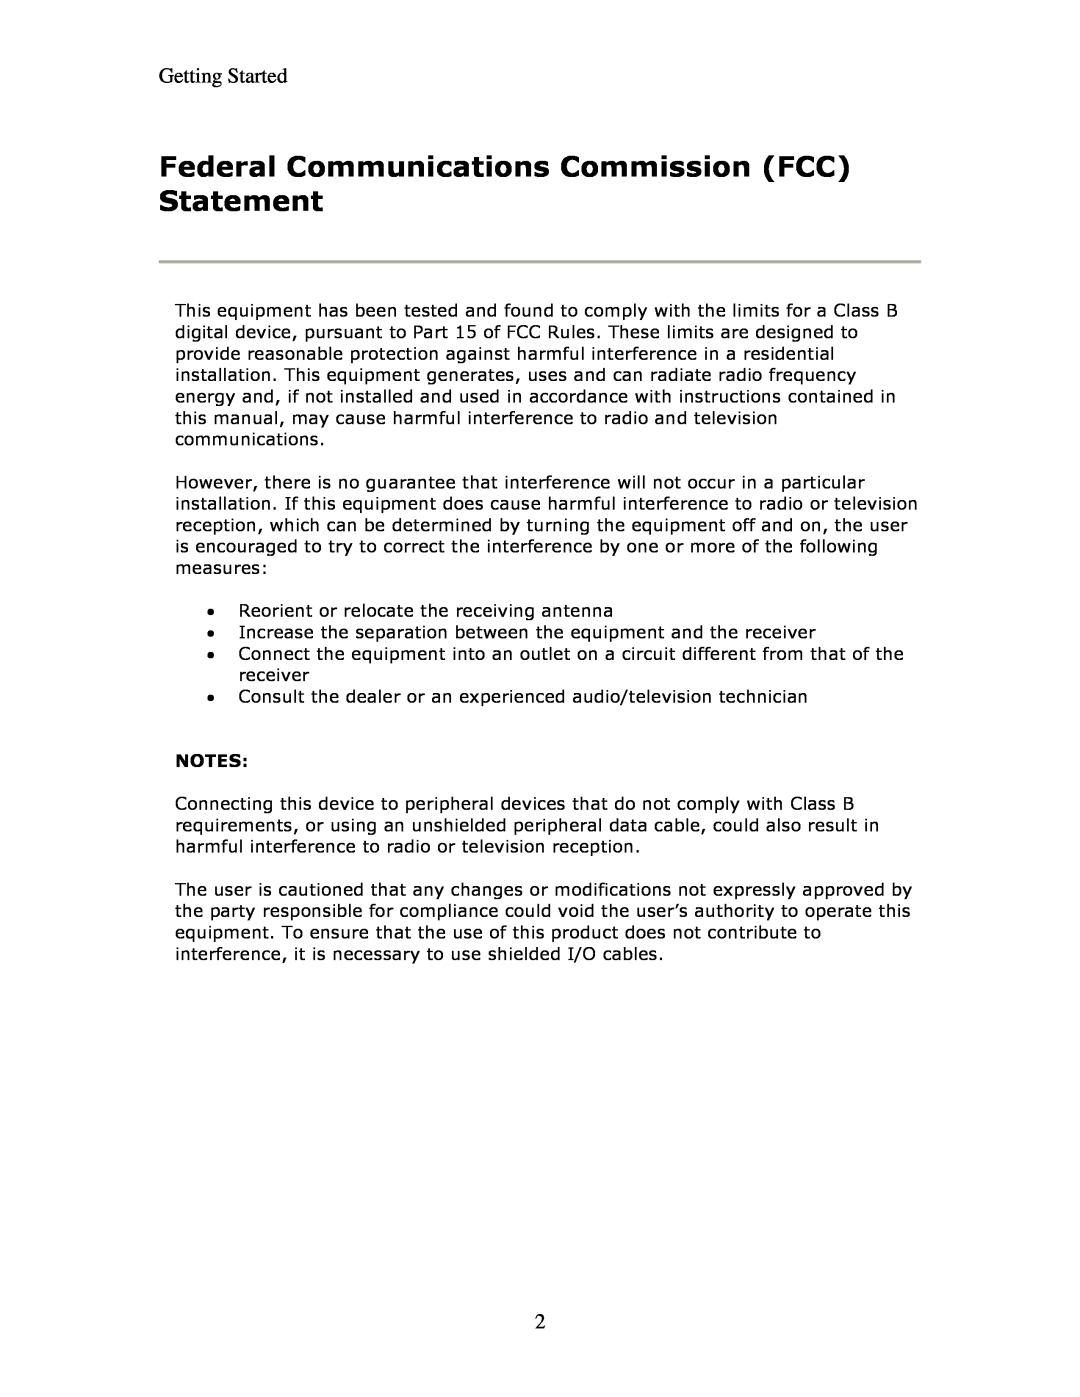 Sharp PNTPC2W7A, PN-TPC2W7A manual Federal Communications Commission FCC Statement, Getting Started 